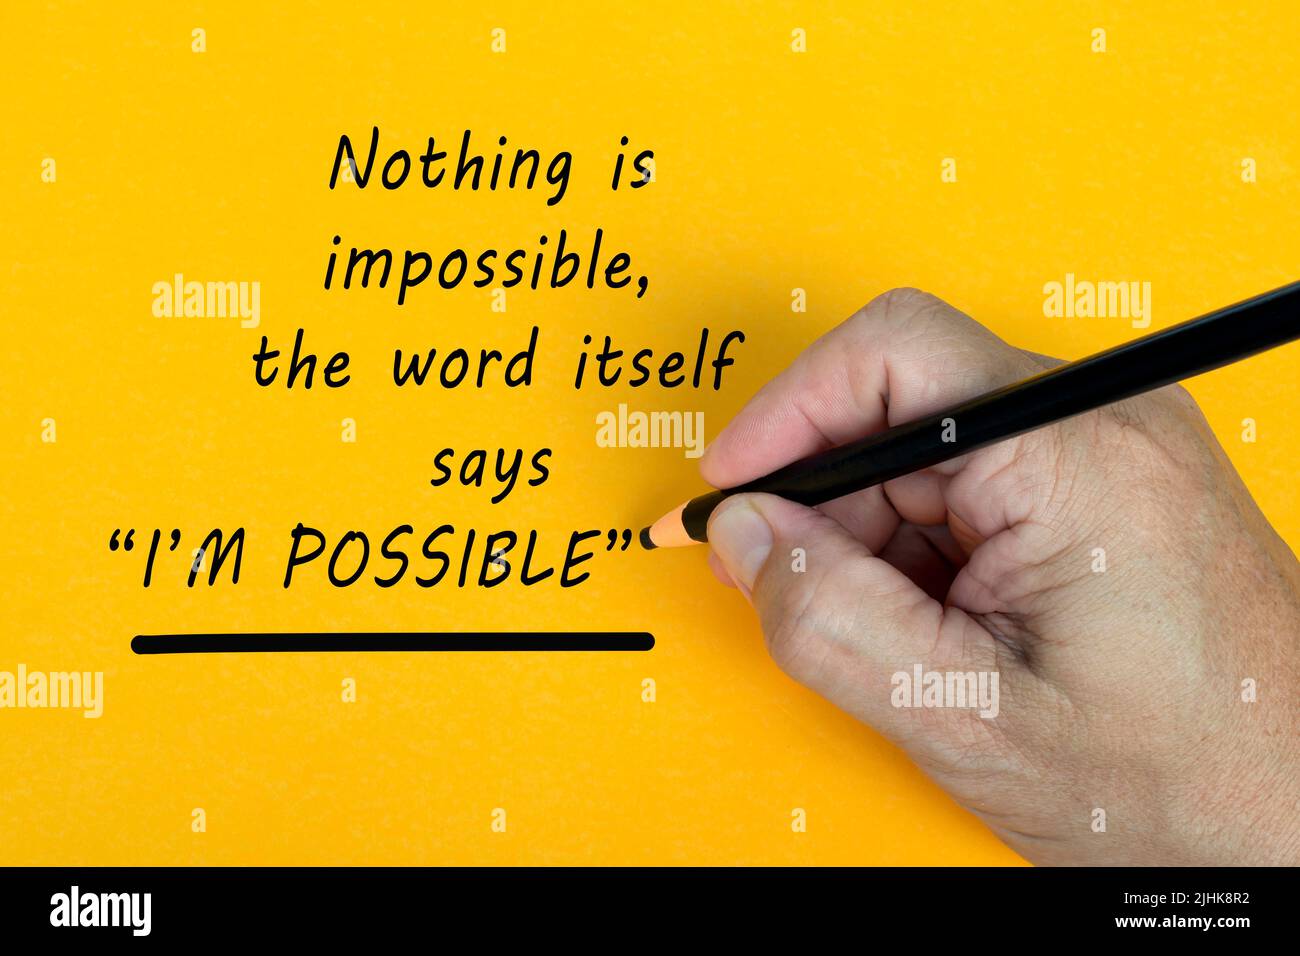 Male hand writes in black pencil the word NOTHING IS IMPOSSIBLE, THE WORD ITSELF SAYS I AM POSSIBLE on a yellow background. Stock Photo